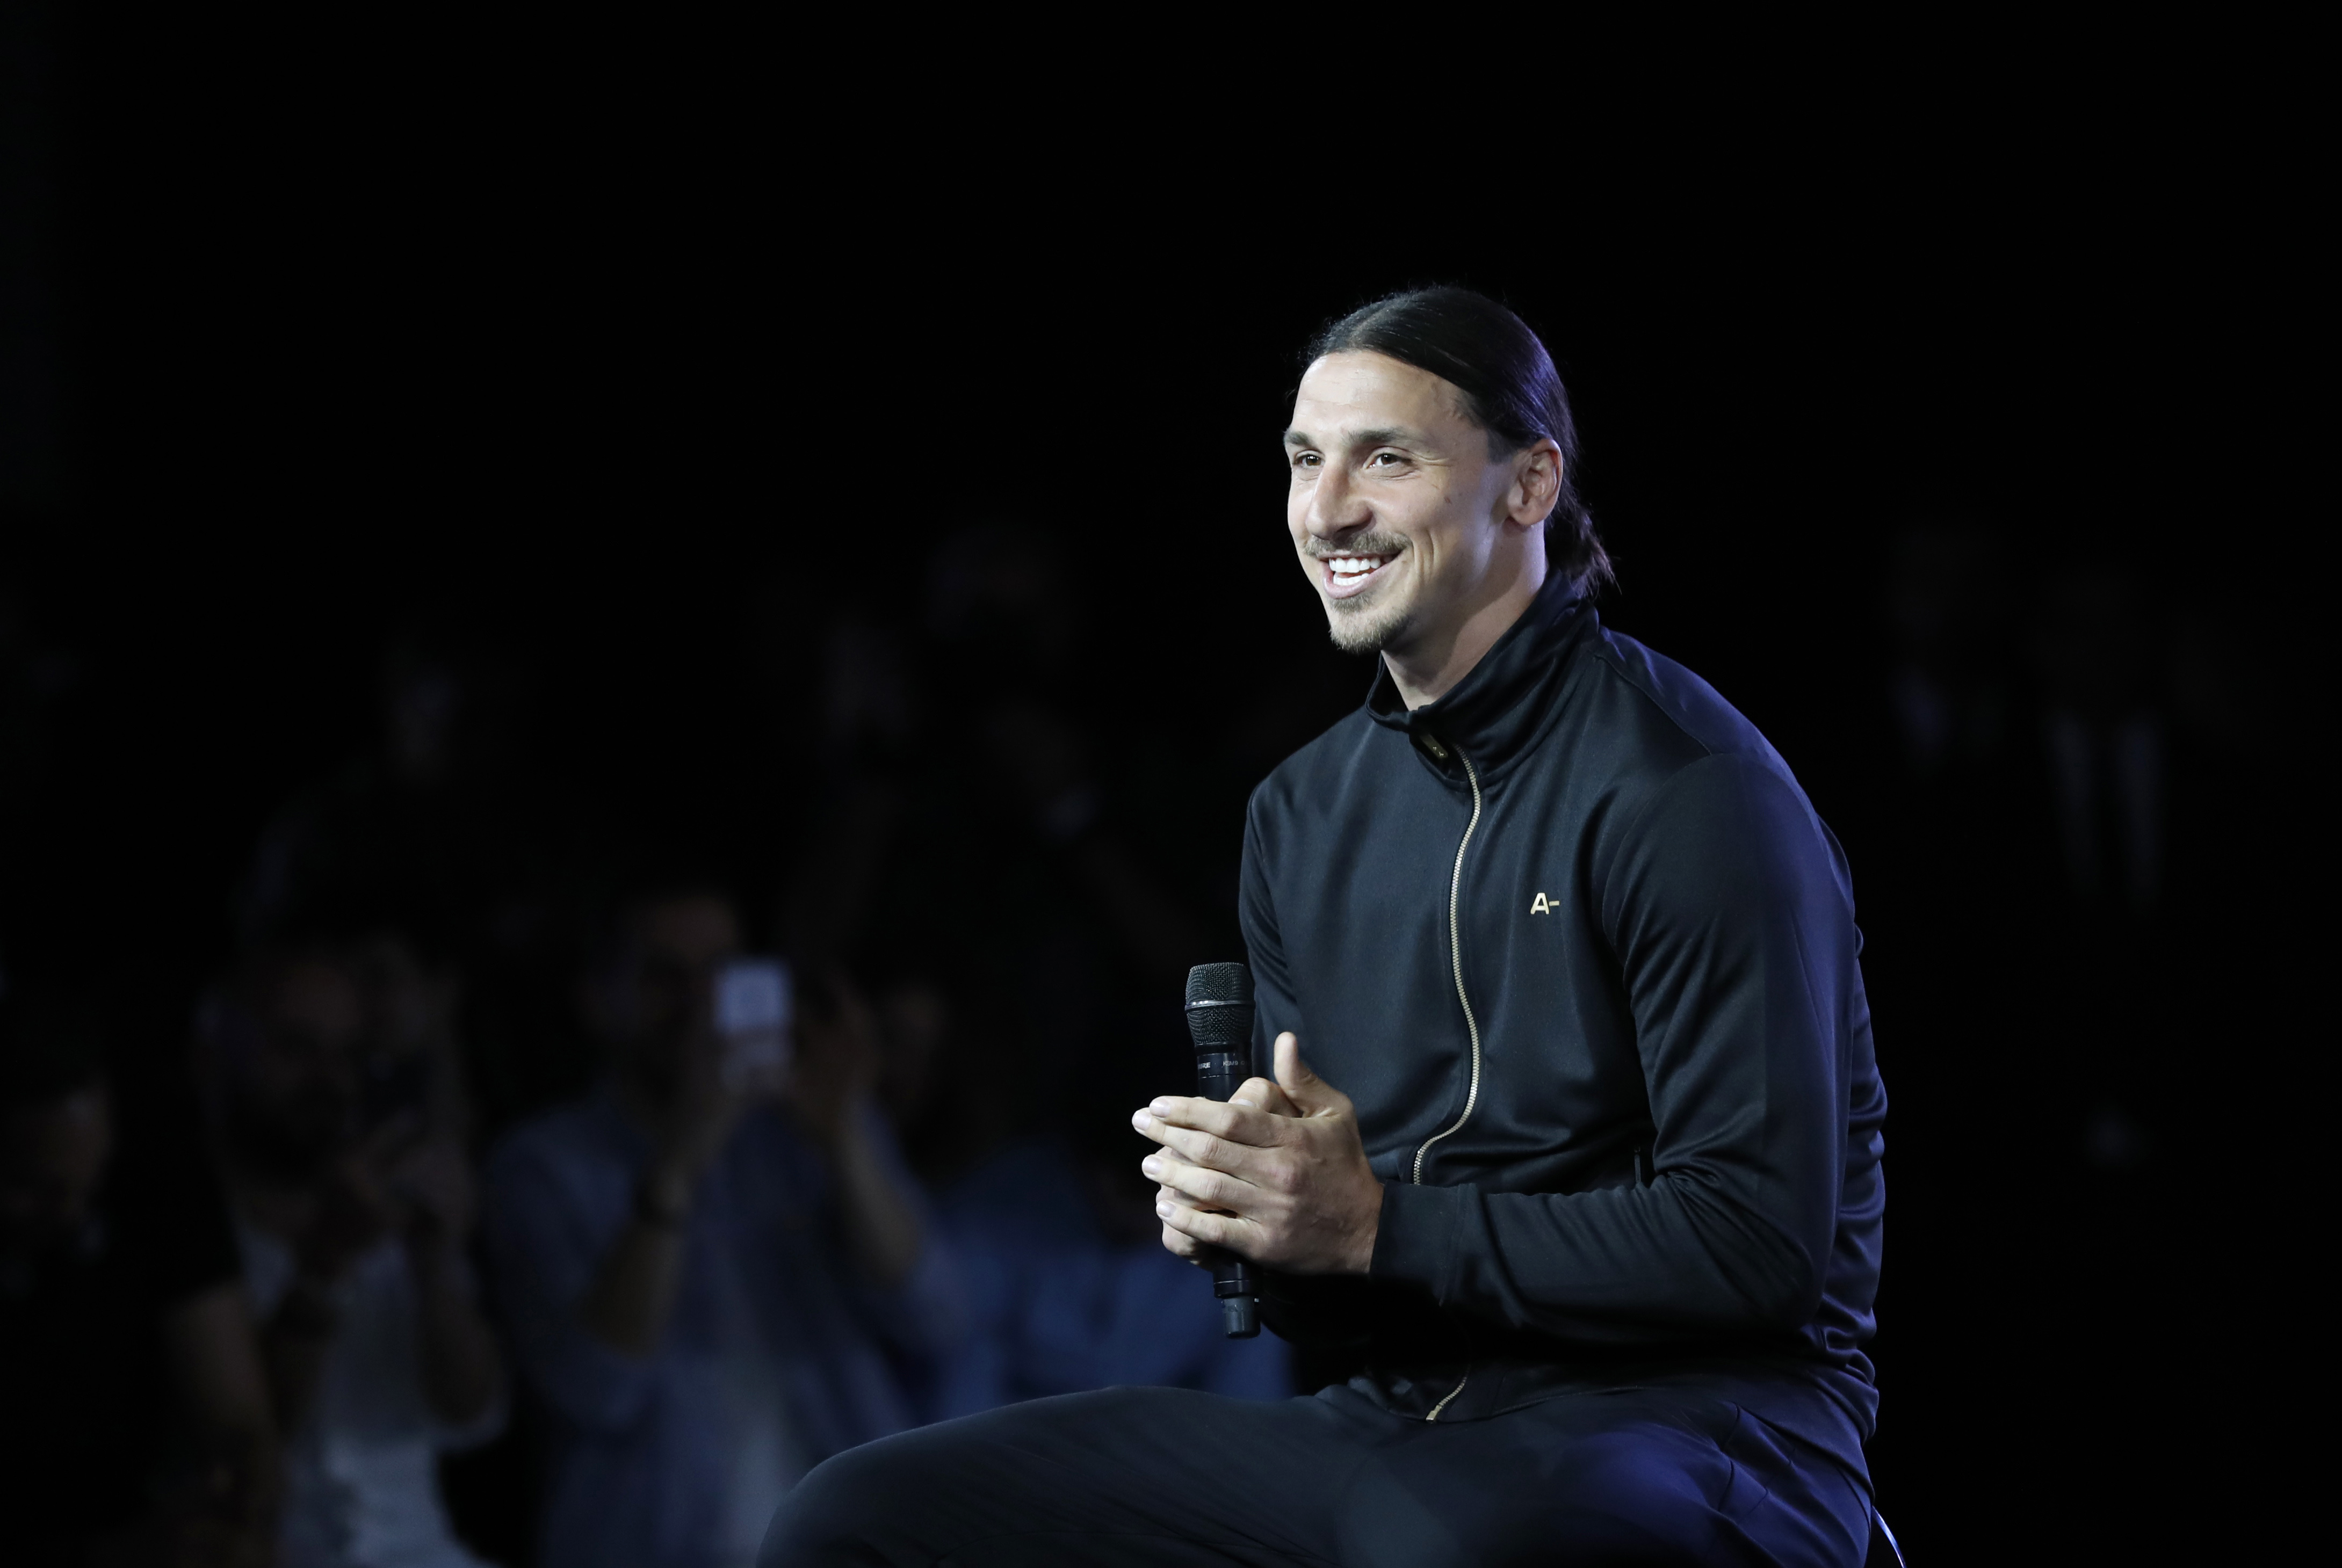 Former Paris Saint-Germain (PSG) forward Zlatan Ibrahimovic smiles during a press conference for the presentation of his sportswear brand A-Z, on June 7, 2016 in Paris.  / AFP / FRANCOIS GUILLOT        (Photo credit should read FRANCOIS GUILLOT/AFP/Getty Images)